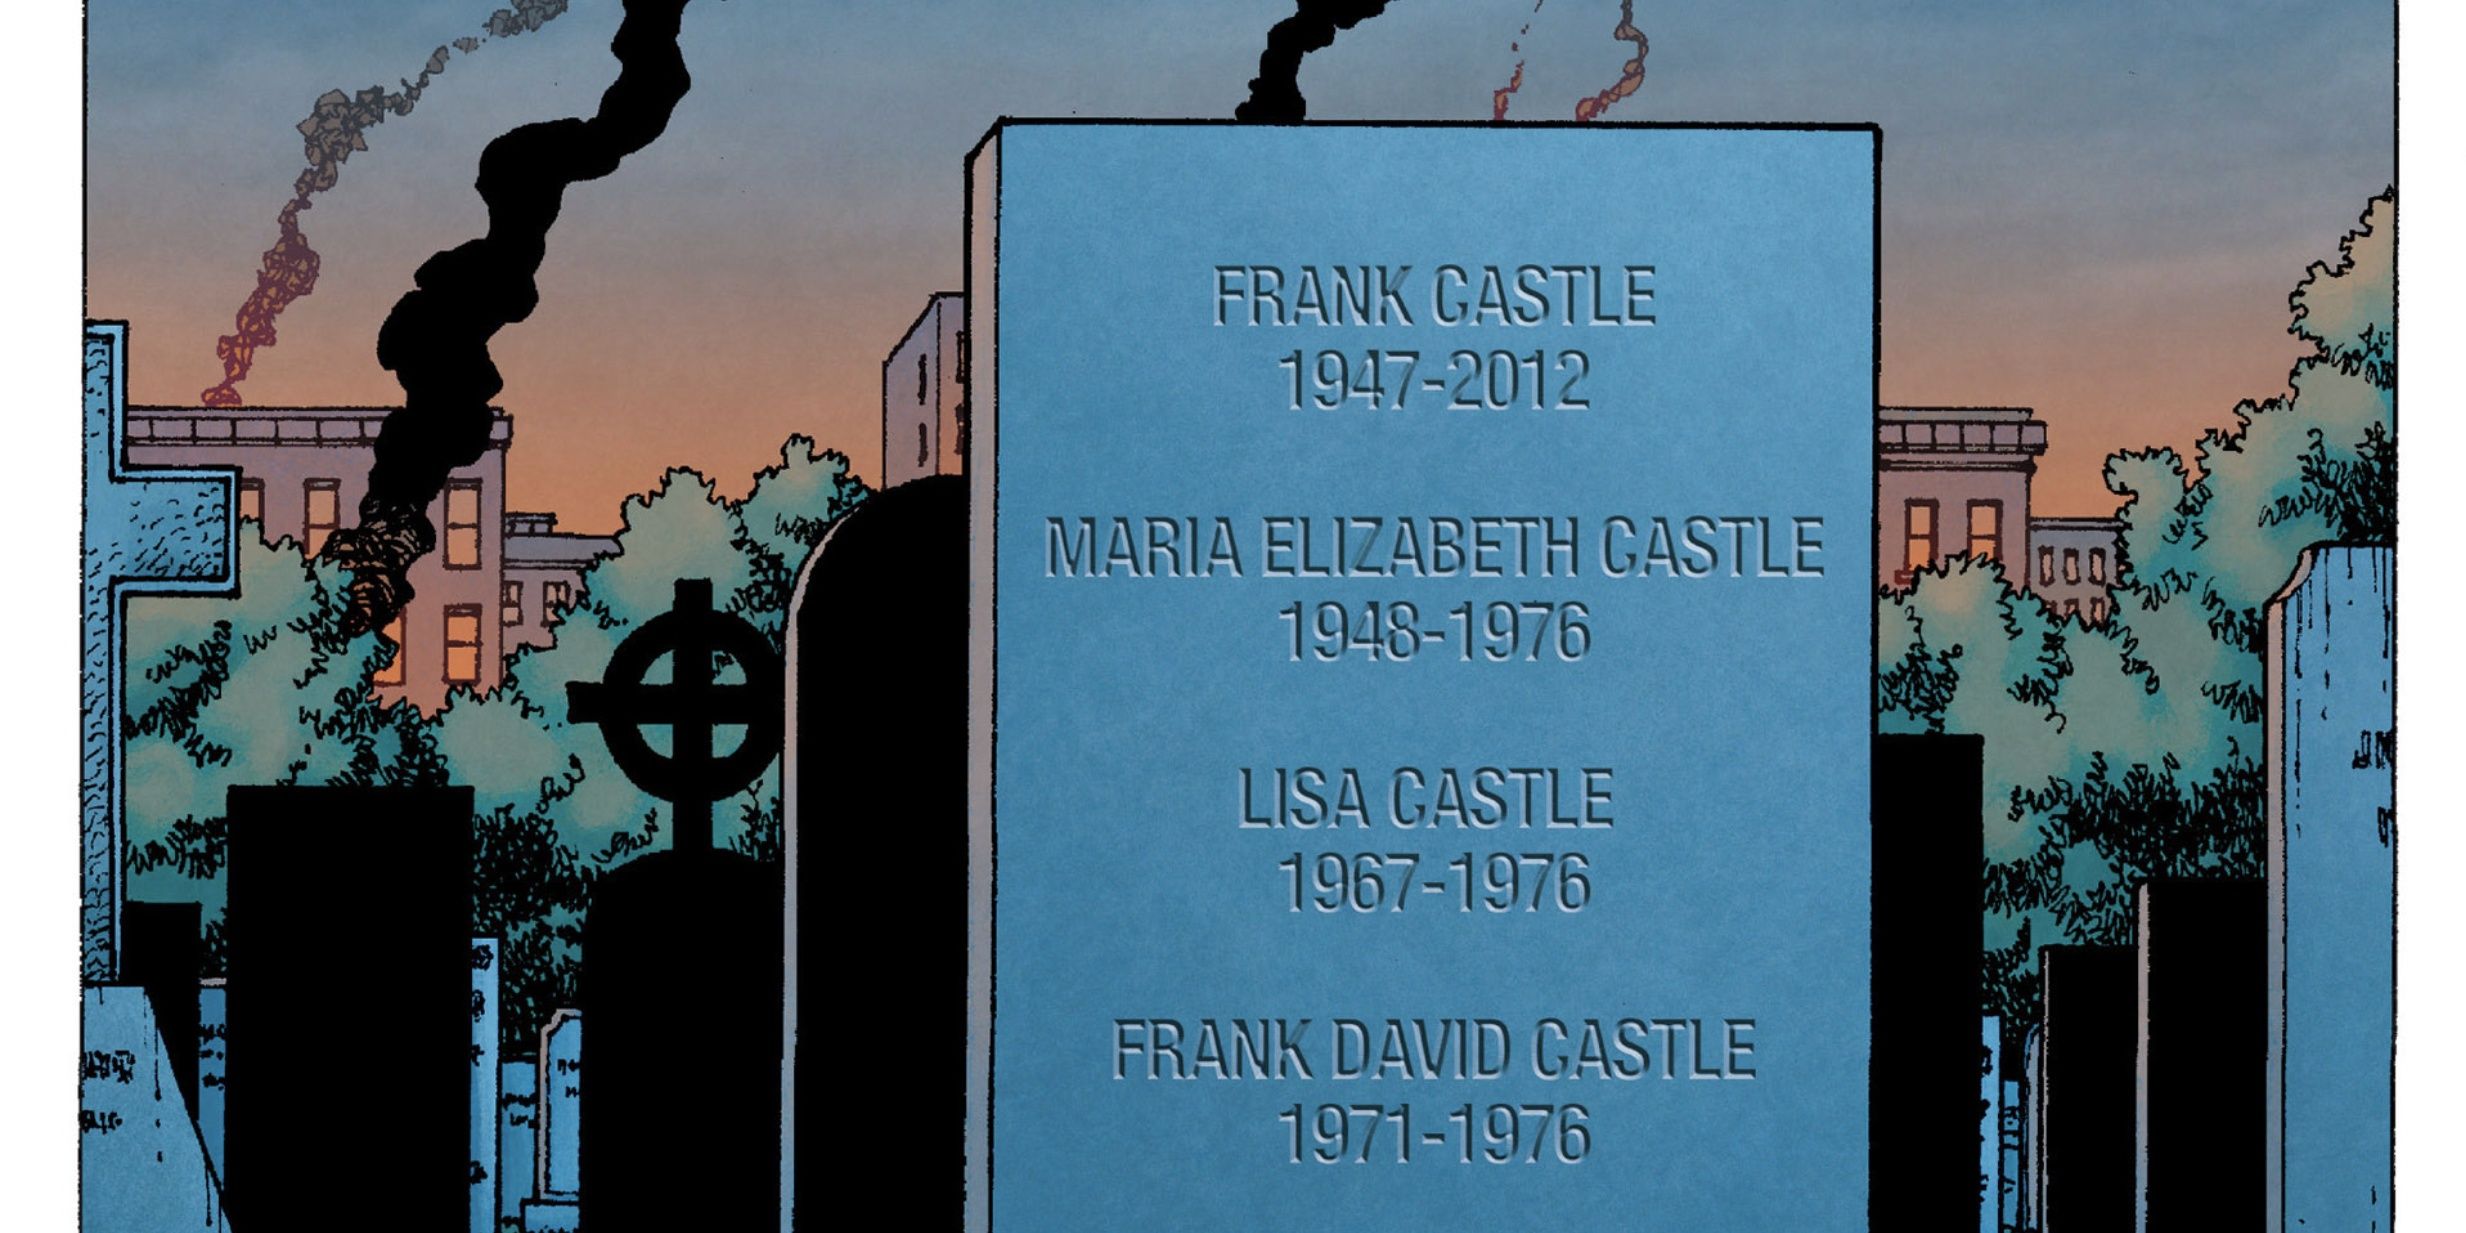 The gravestone of the Punisher